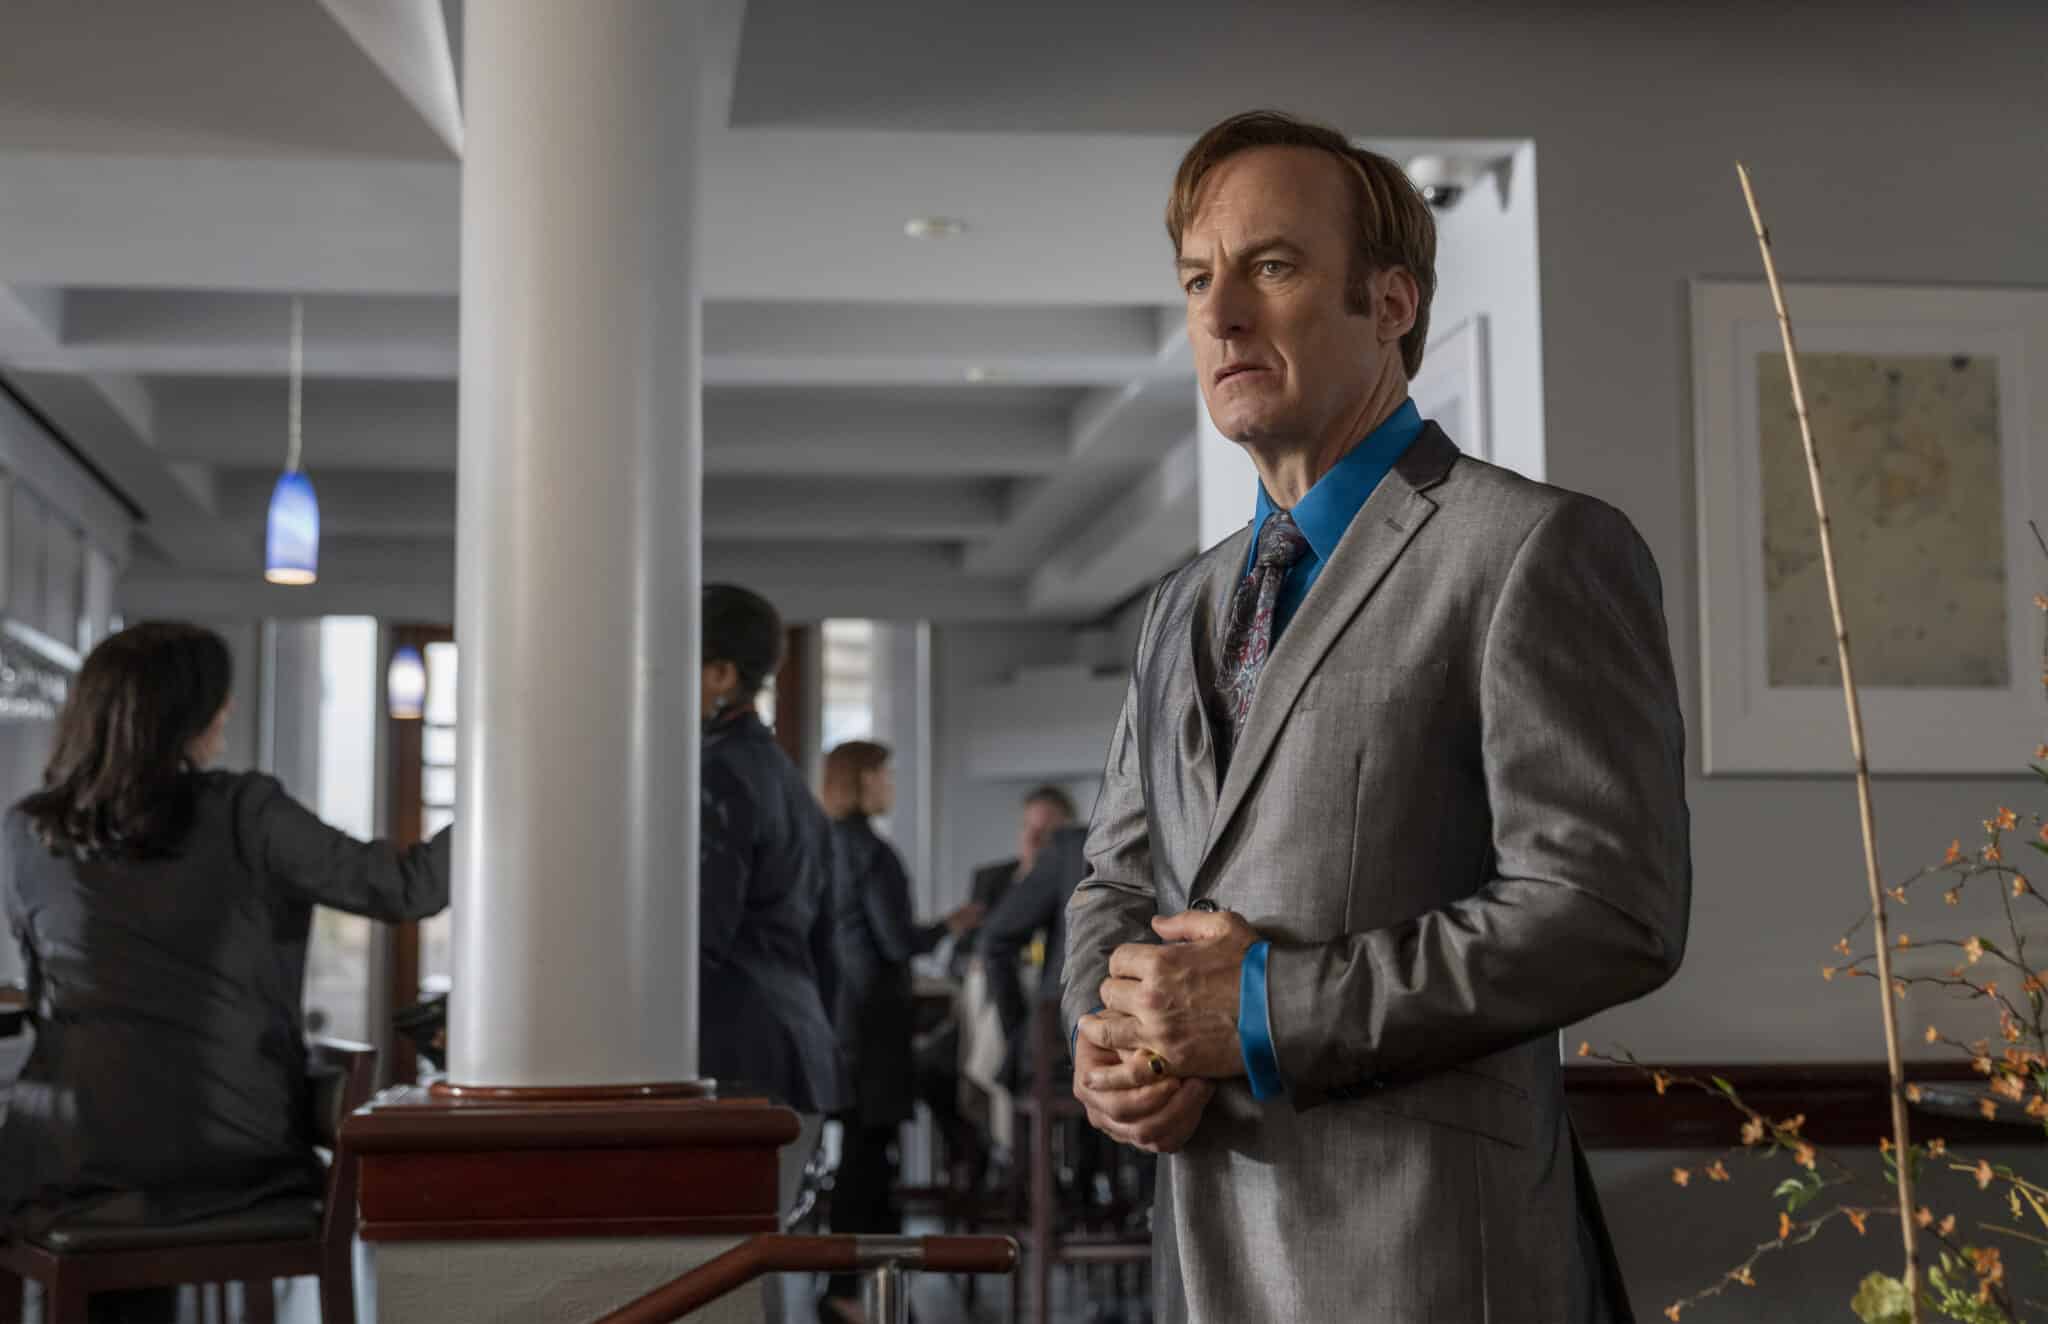 When Will Season 5 Of ‘Better Call Saul’ Drop On Netflix In The United States?